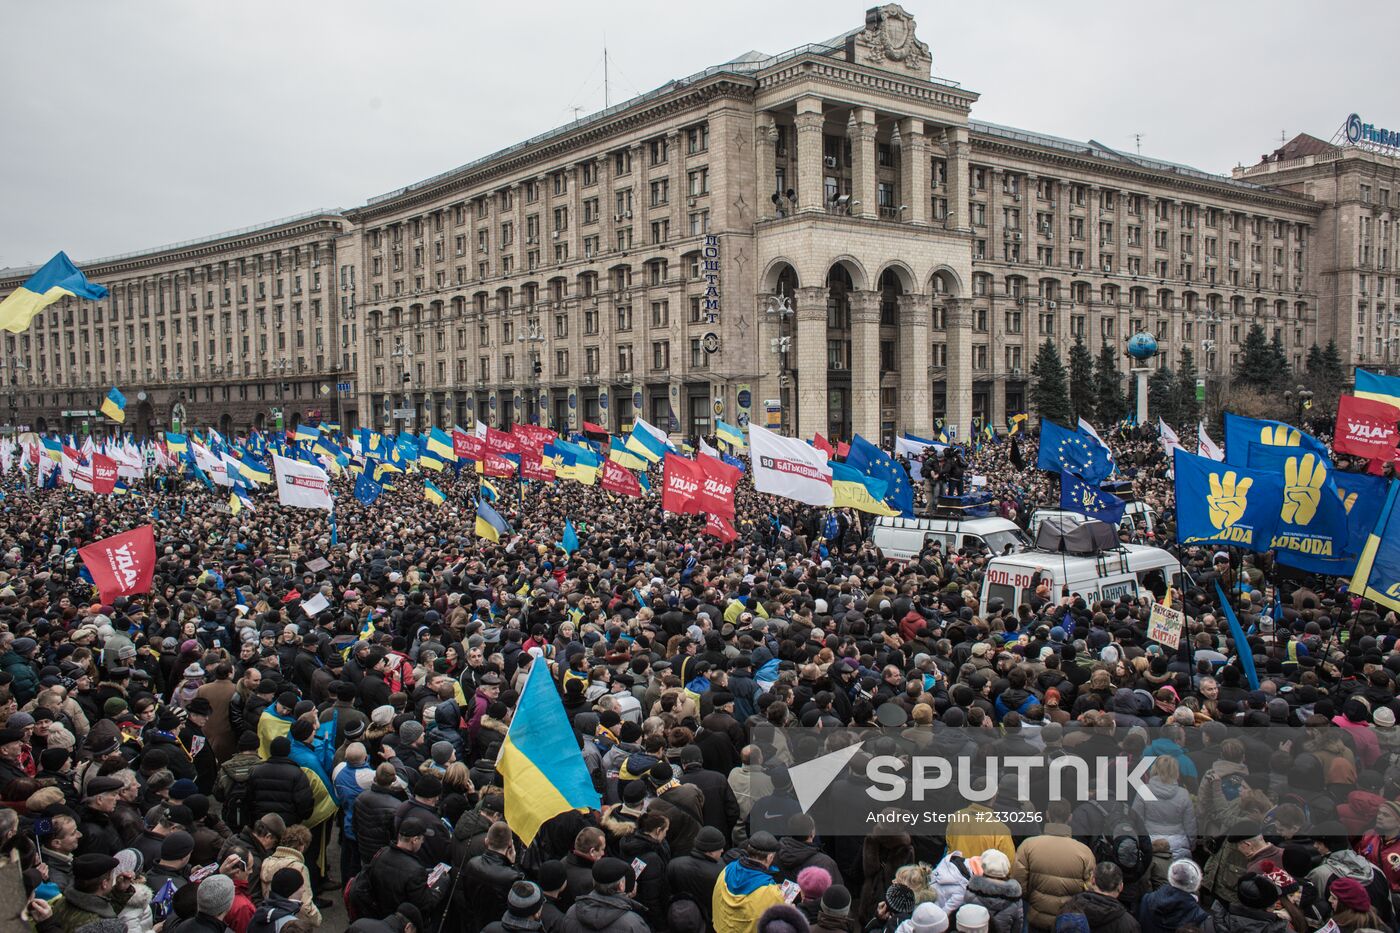 Protests among supporters of Ukraine's European integration